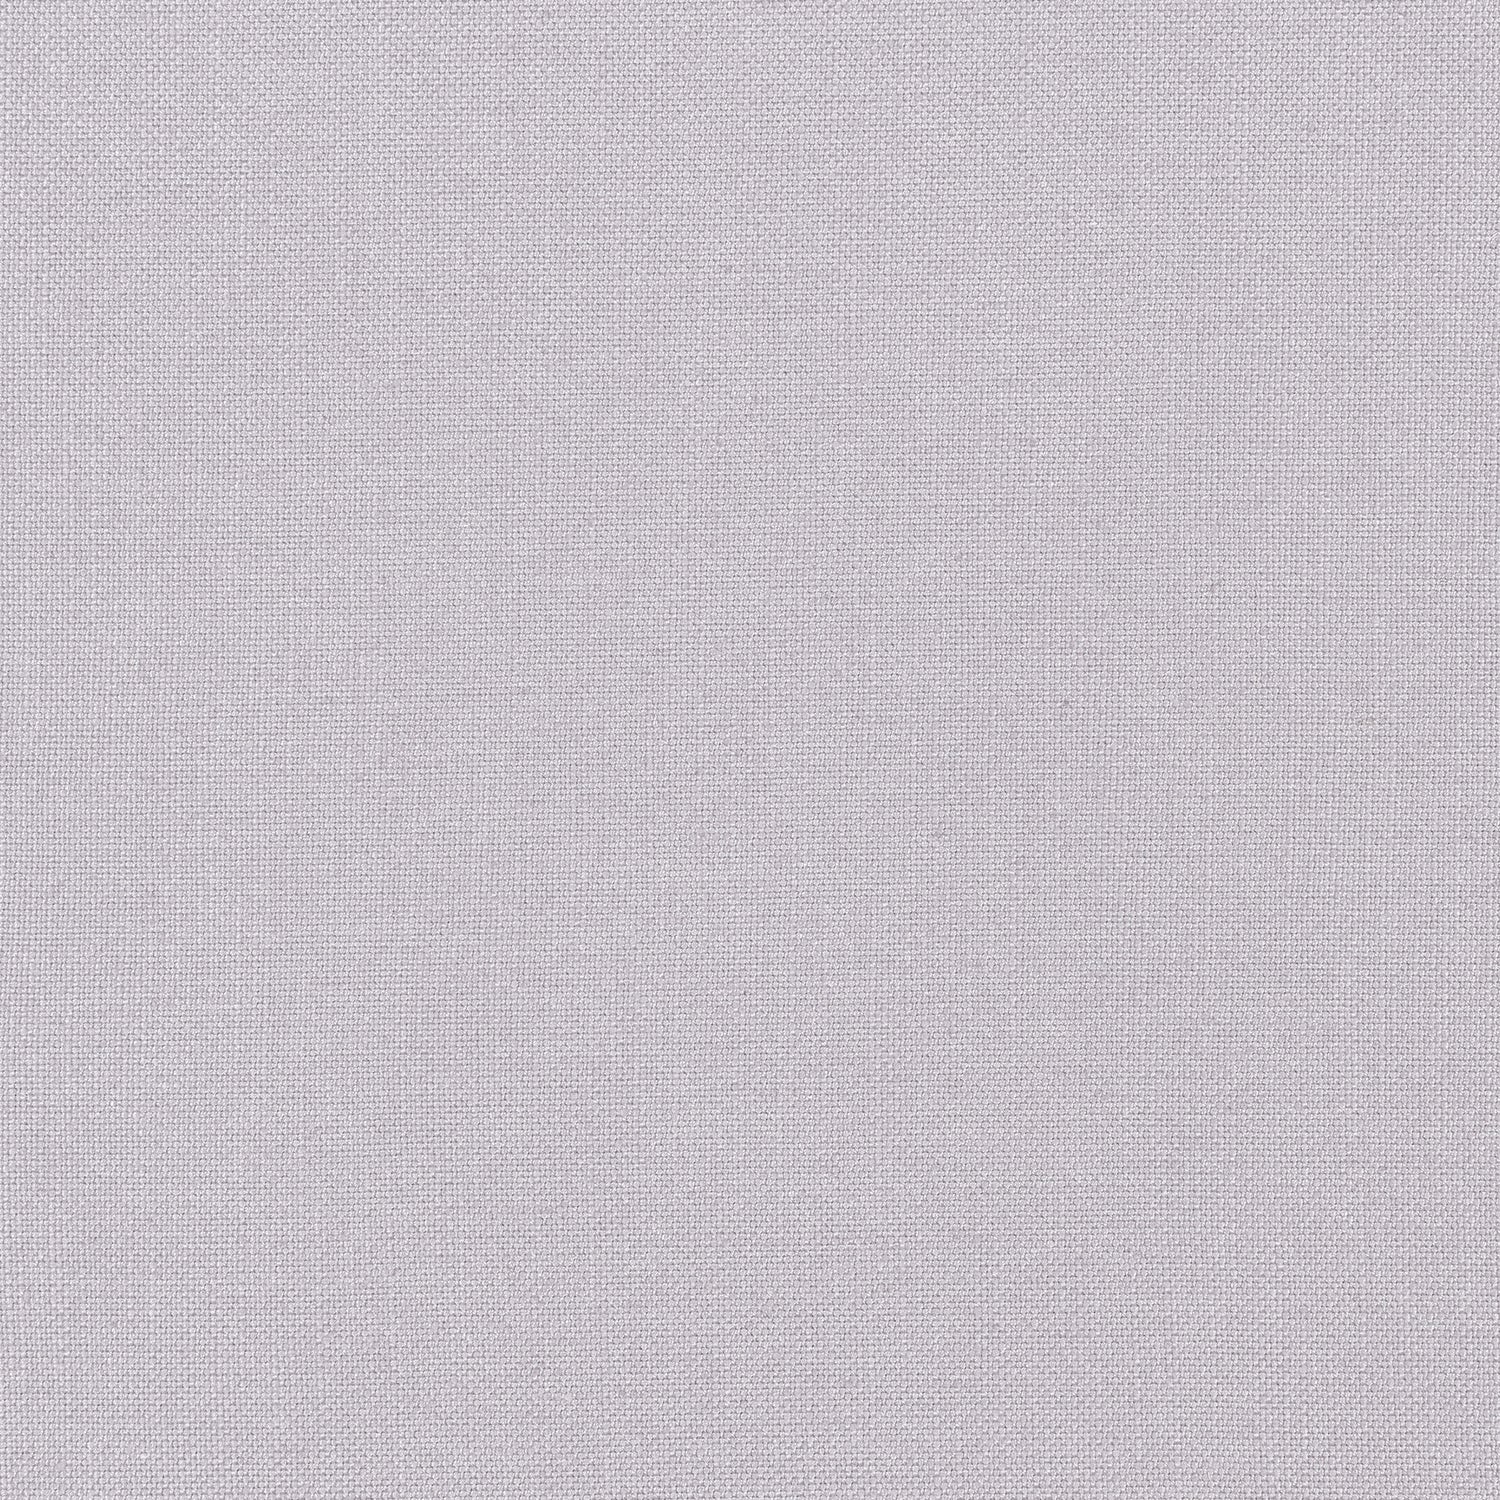 Palisade Linen fabric in lilac color - pattern number FWW7640 - by Thibaut in the Palisades collection